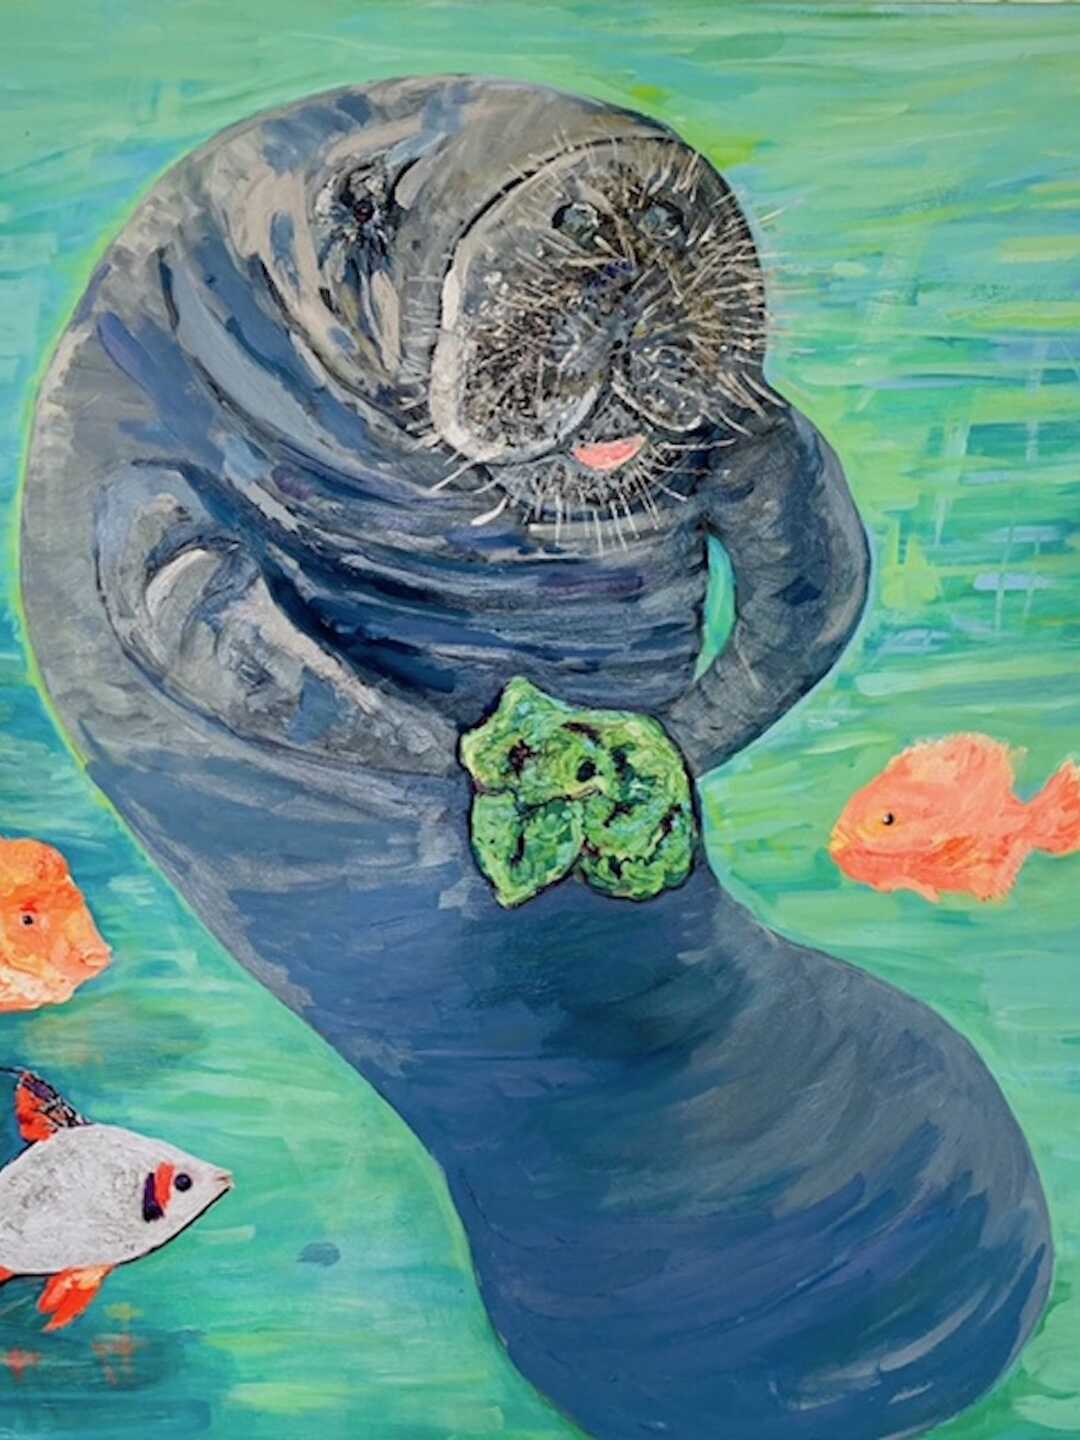 Painting of Butterball the manatee by artist Darcy Fitzpatrick